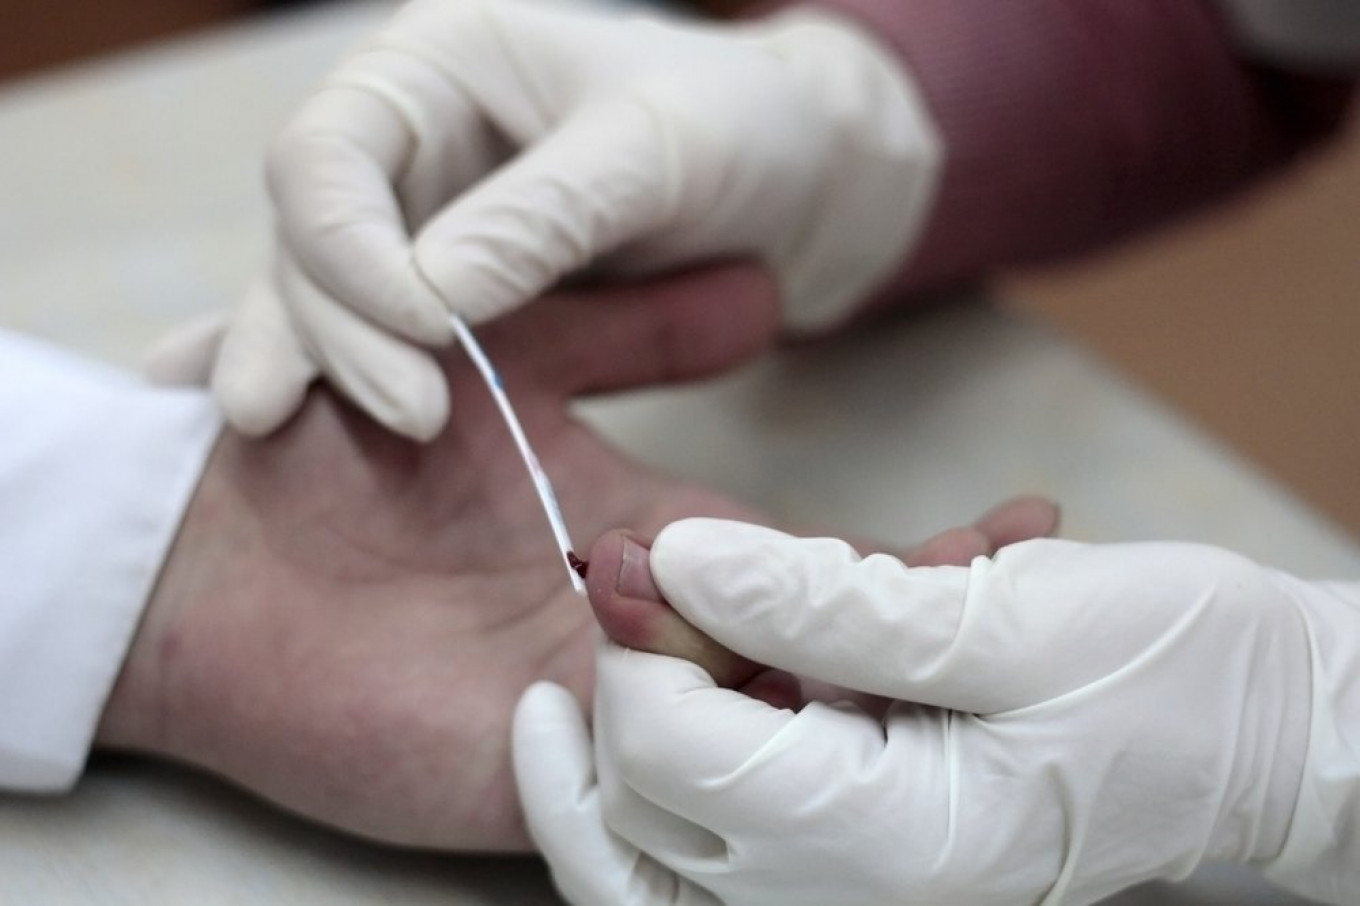 HIV Cases in Russia Surpass 1 Million – State Watchdog